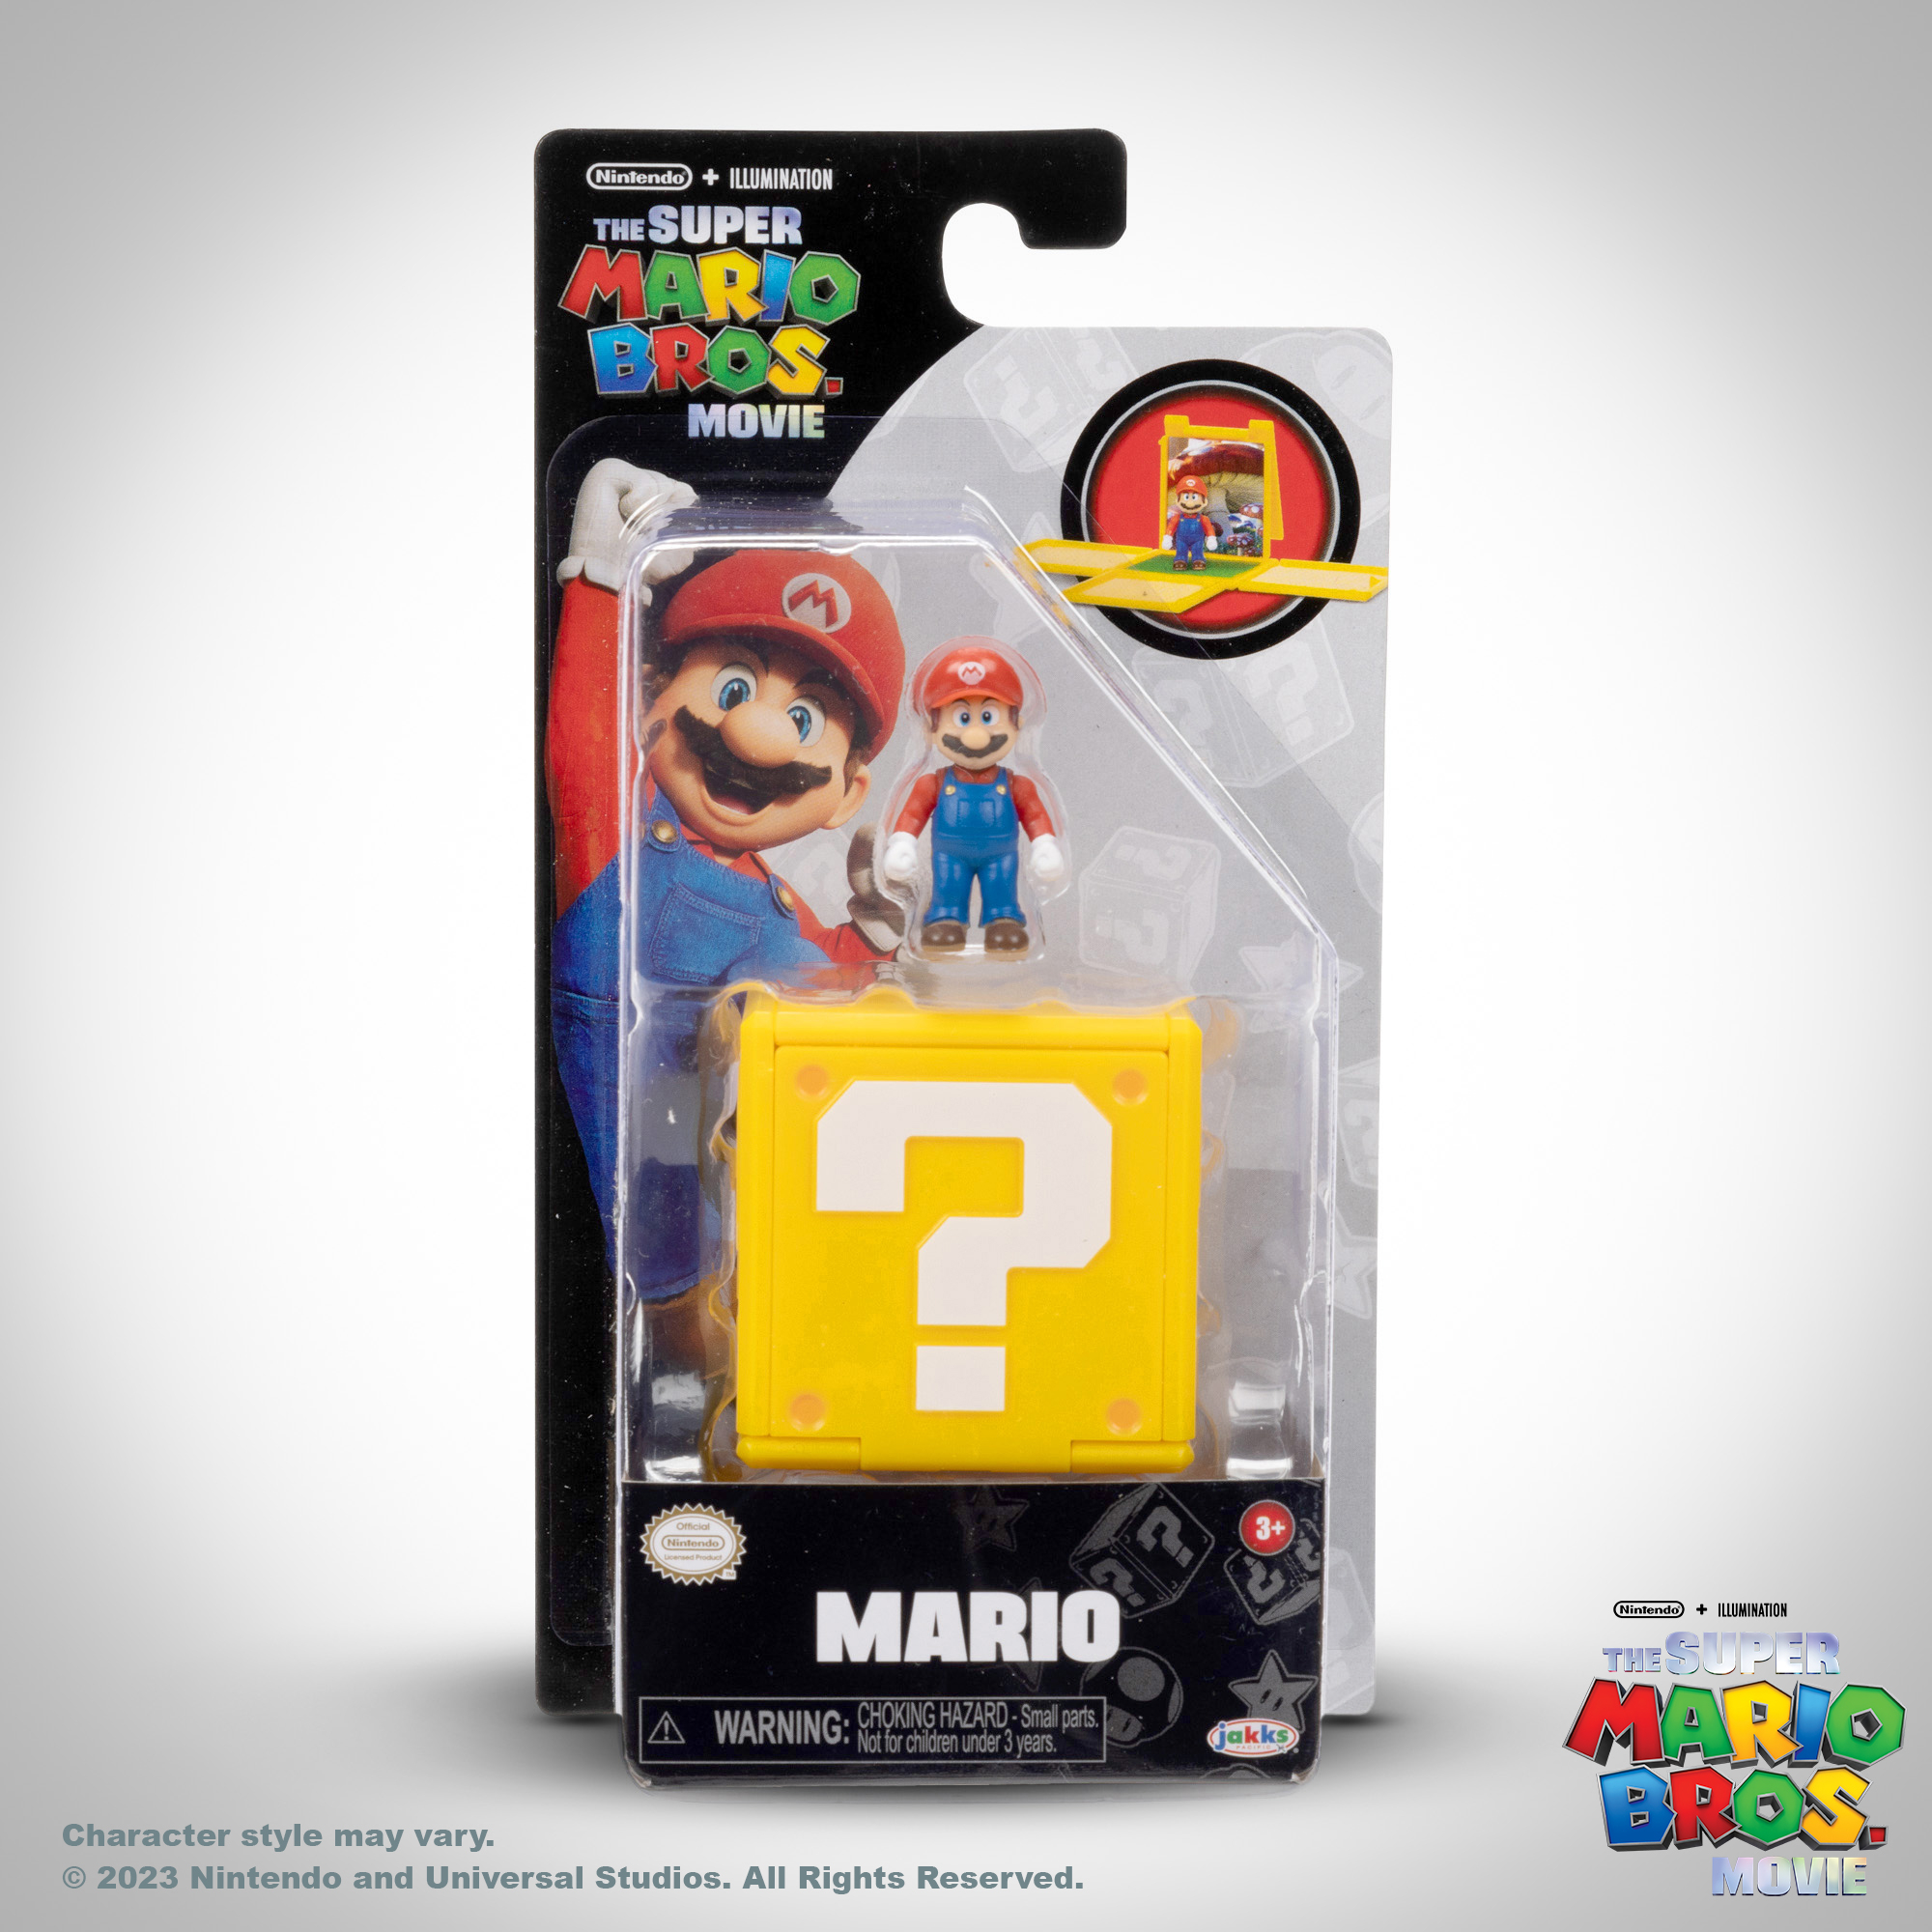 New Super Mario Bros. Movie Toys Are Coming Soon - IGN